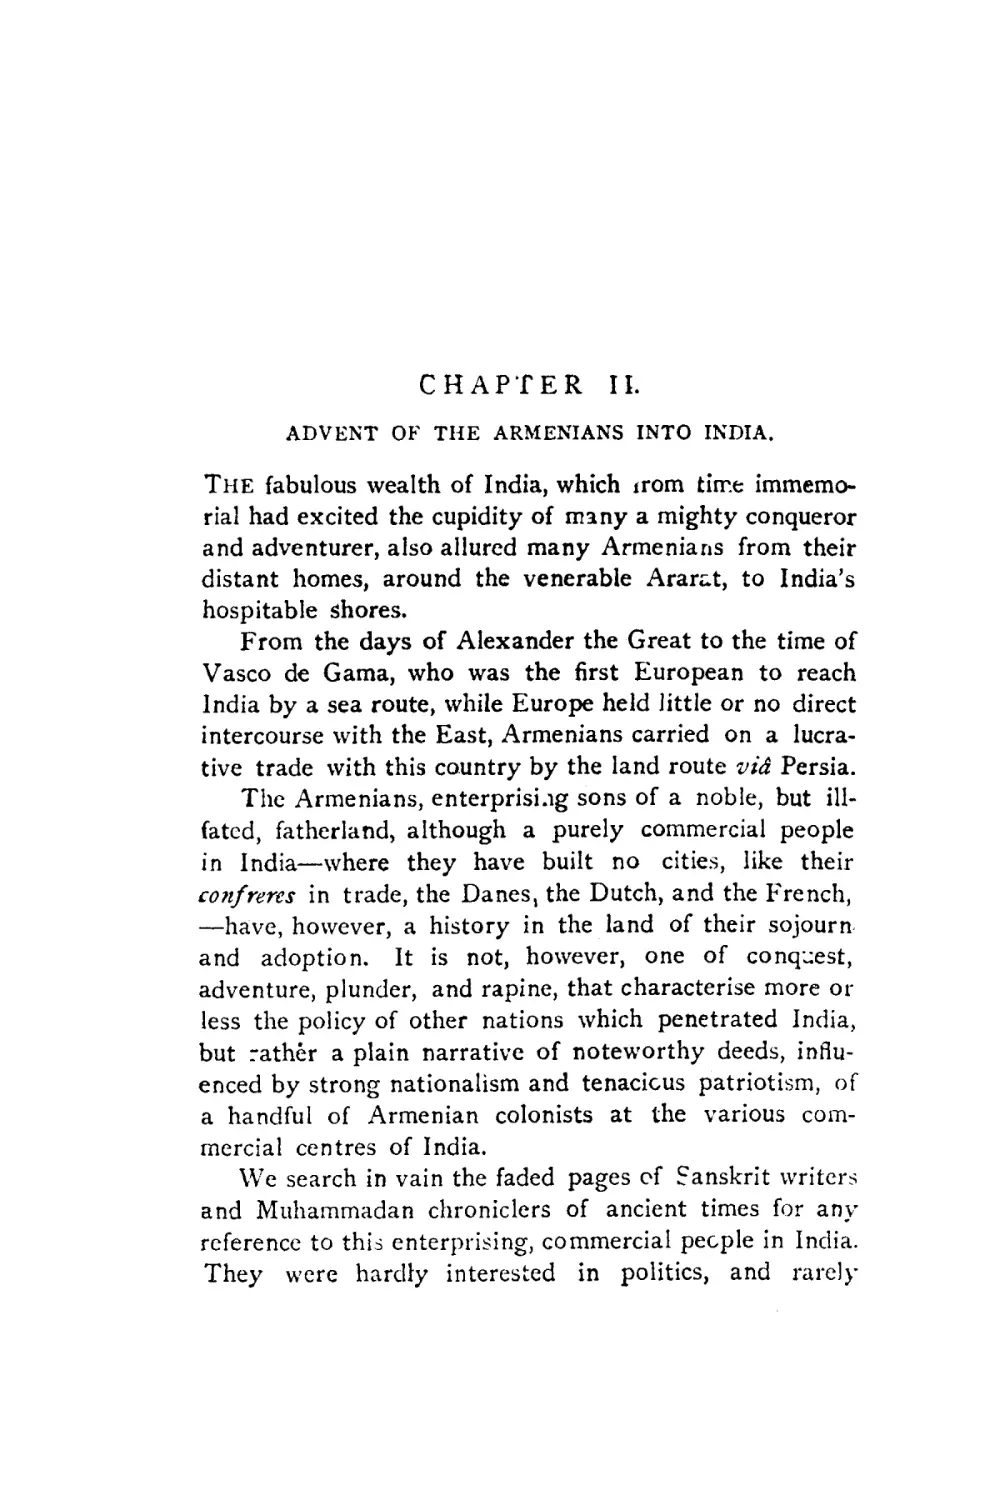 CHAPTER II. ADVENT OF THE ARMENIANS INTO INDIA